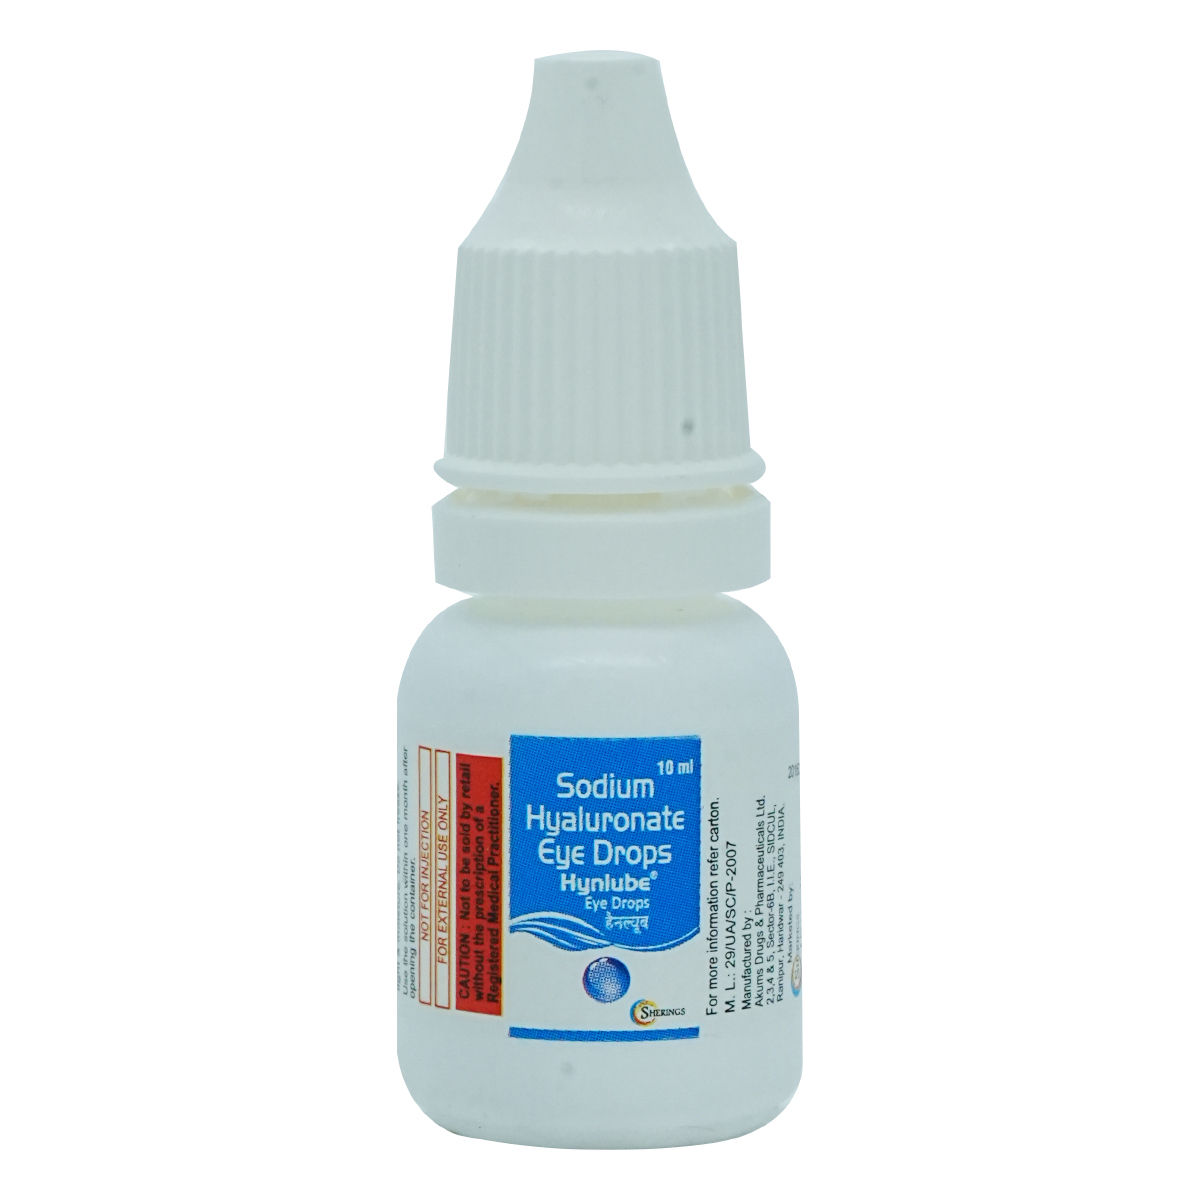 Dry eye gel drops: Uses, side effects, interactions, more